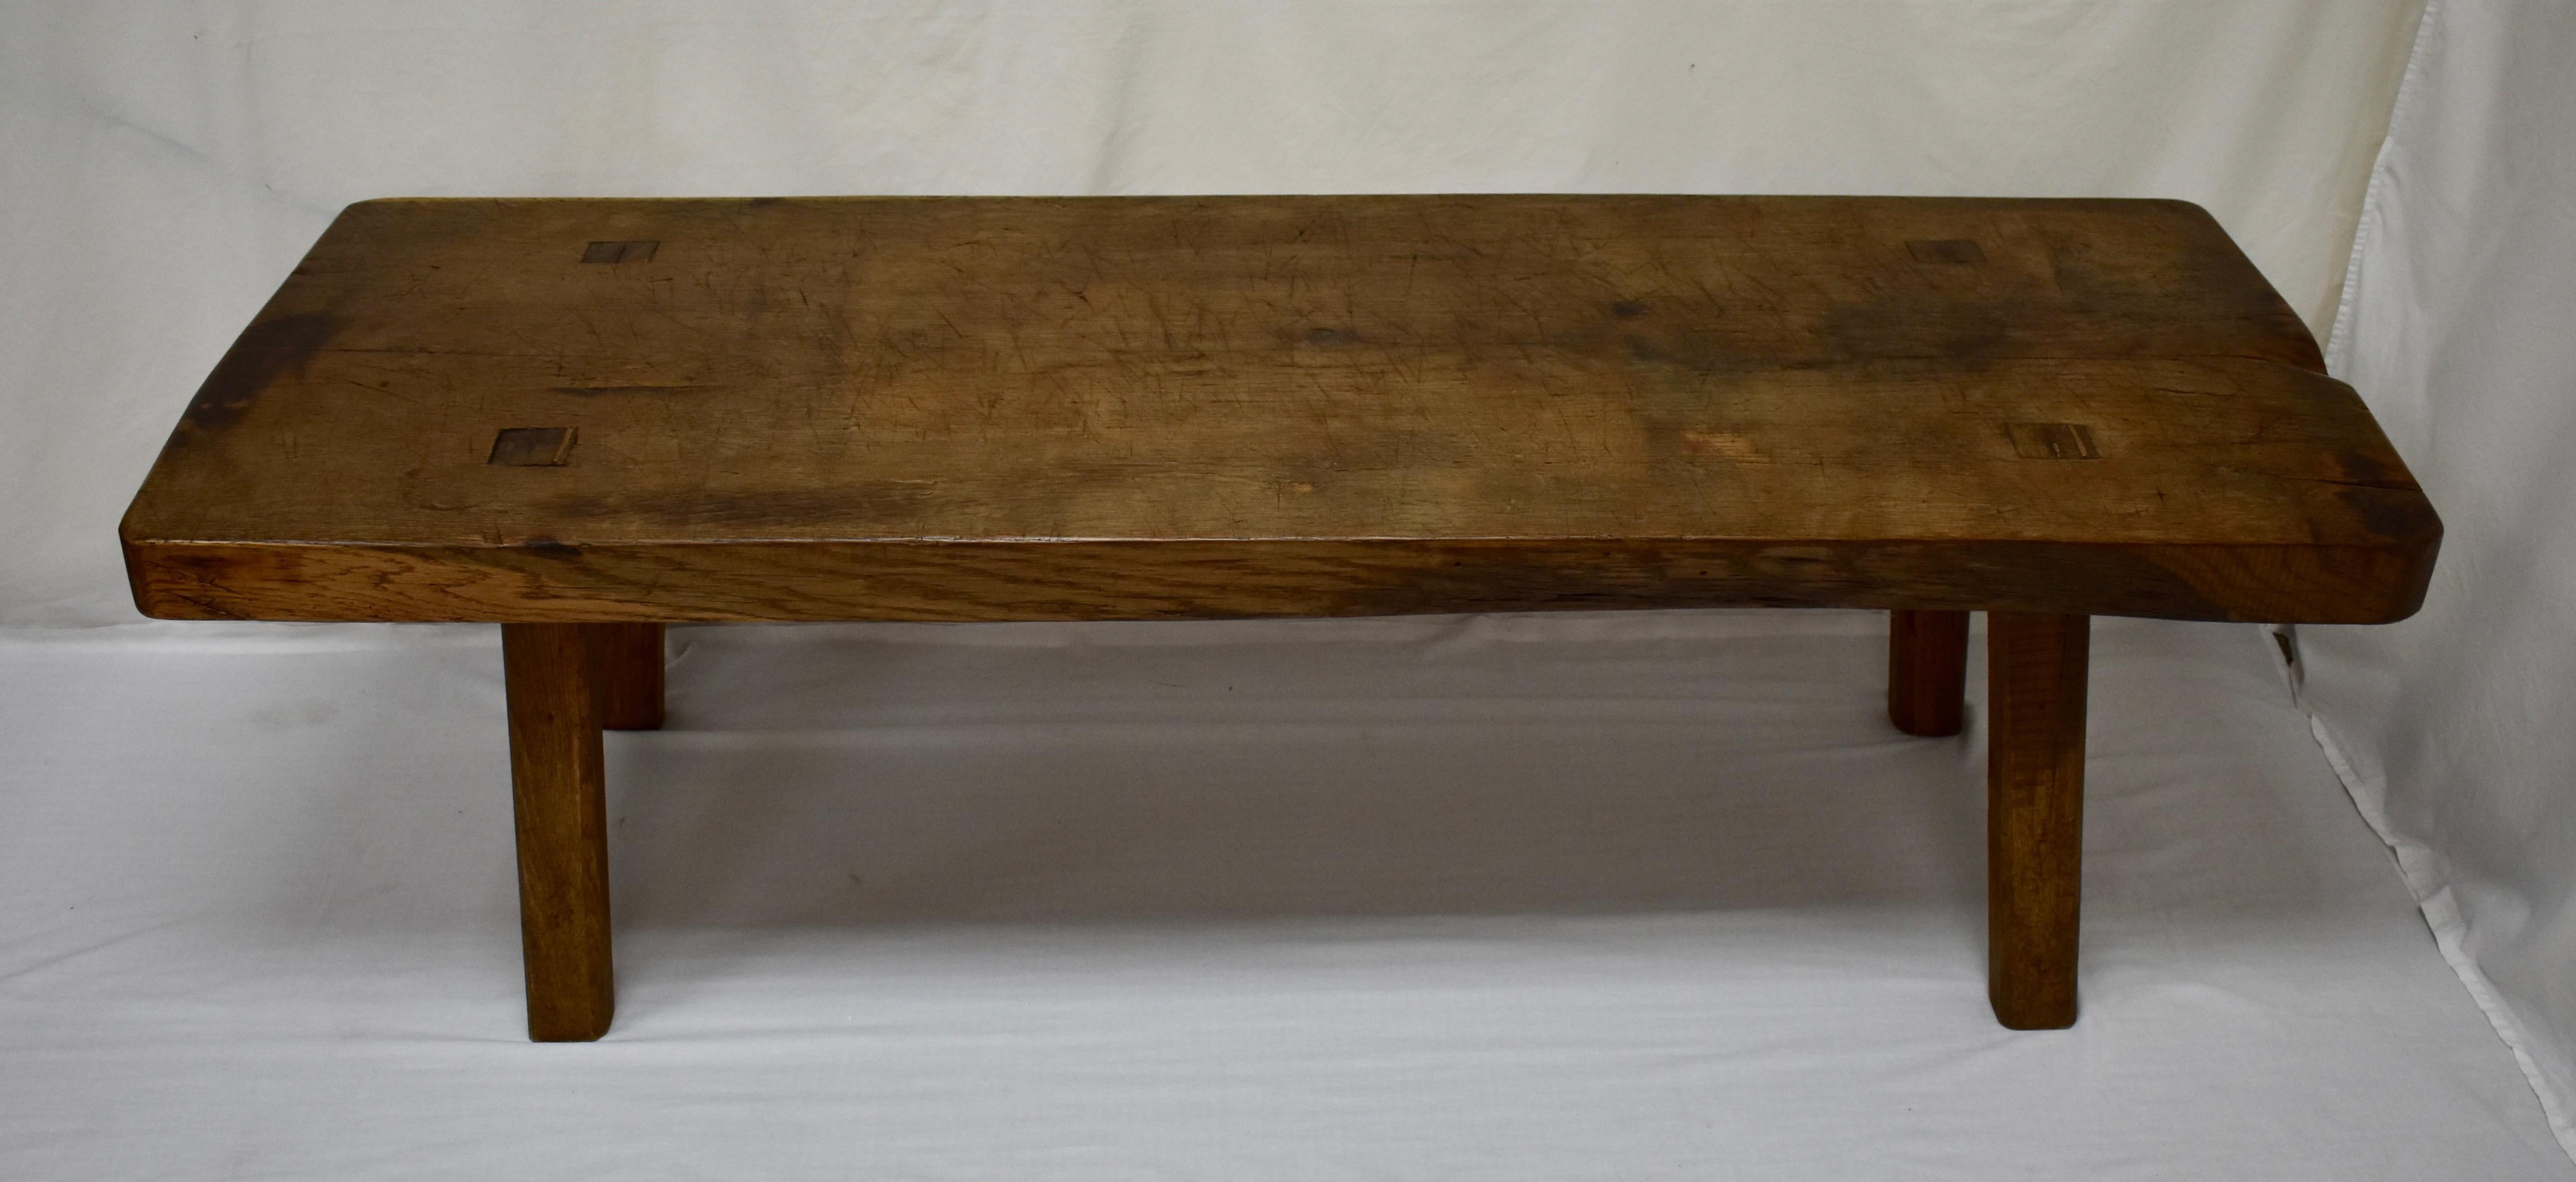 This is the nicest one of these we’ve had for a while. A truly outstanding oak pig bench low table standing on four sturdy hand-hewn splayed legs which are through-tenoned and wedged into the underside of the top. The top itself is a single oak